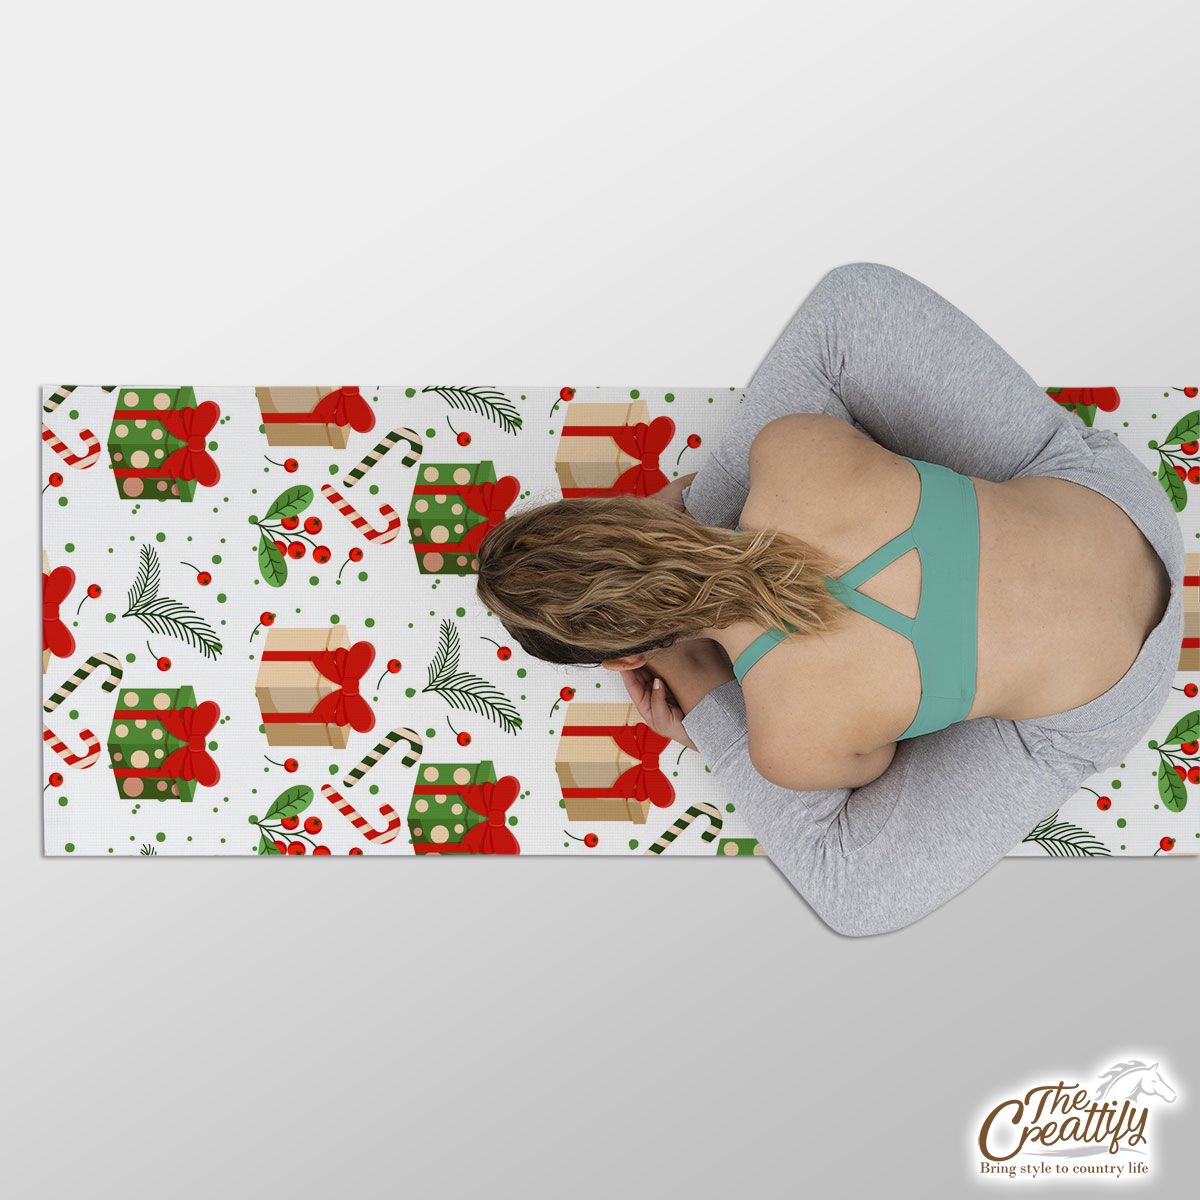 Christmas Gifts And Red Berries Yoga Mat